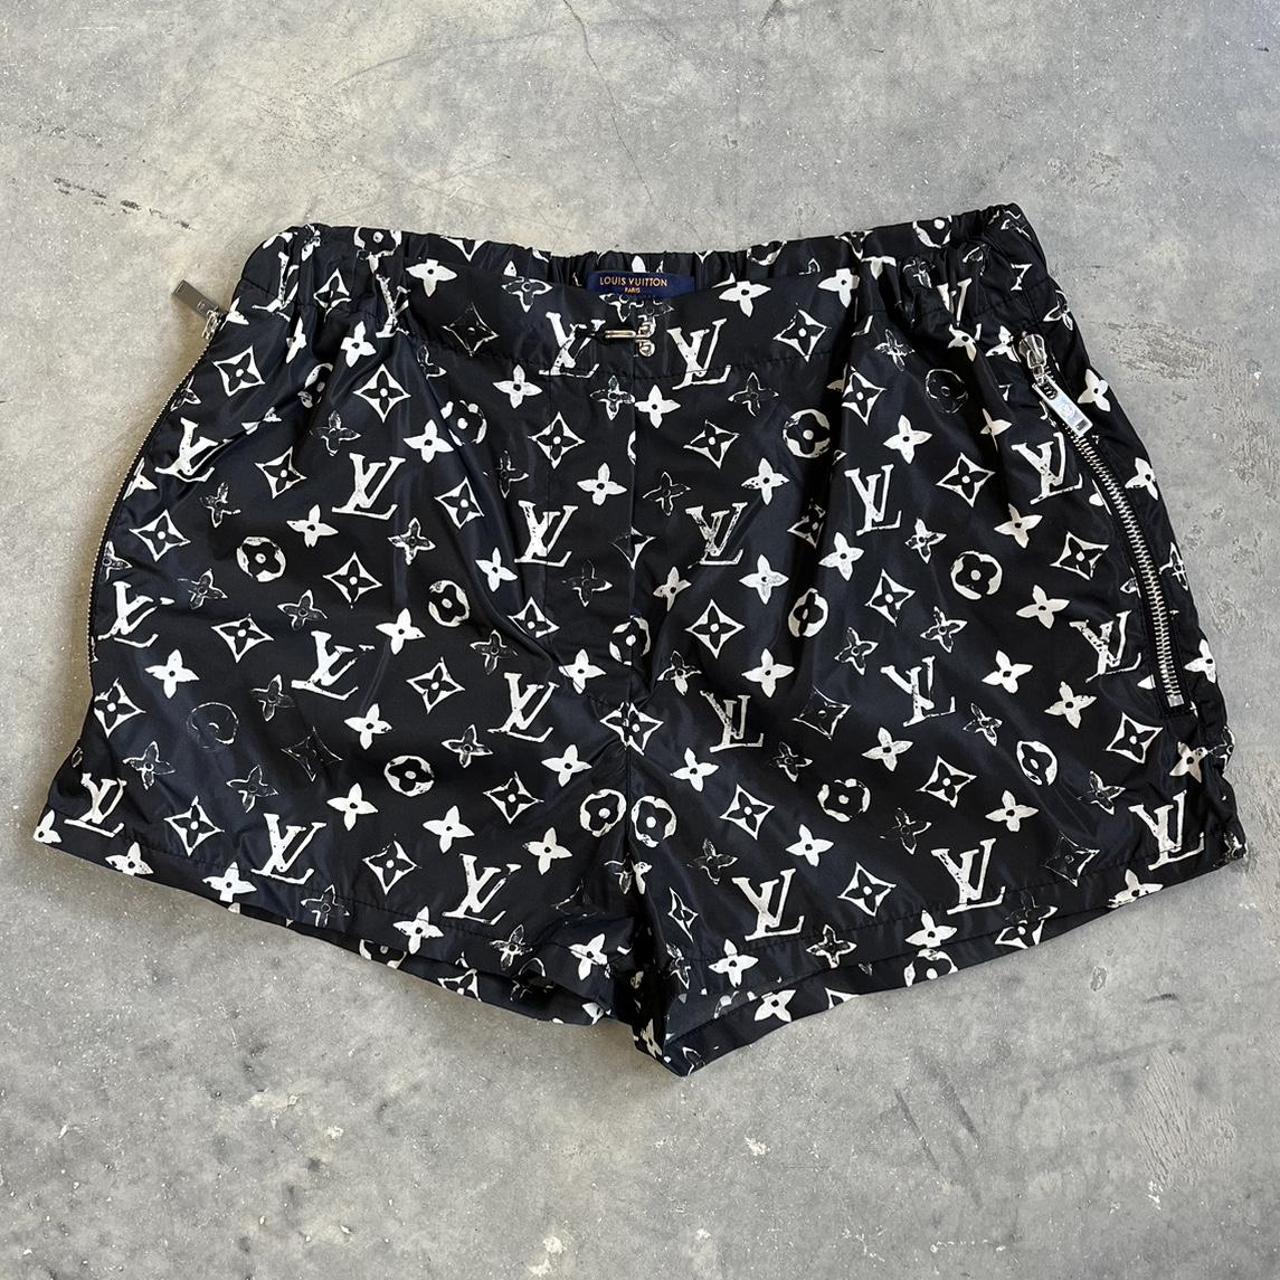 Louis Vuitton cat and dog shorts brand new - Depop